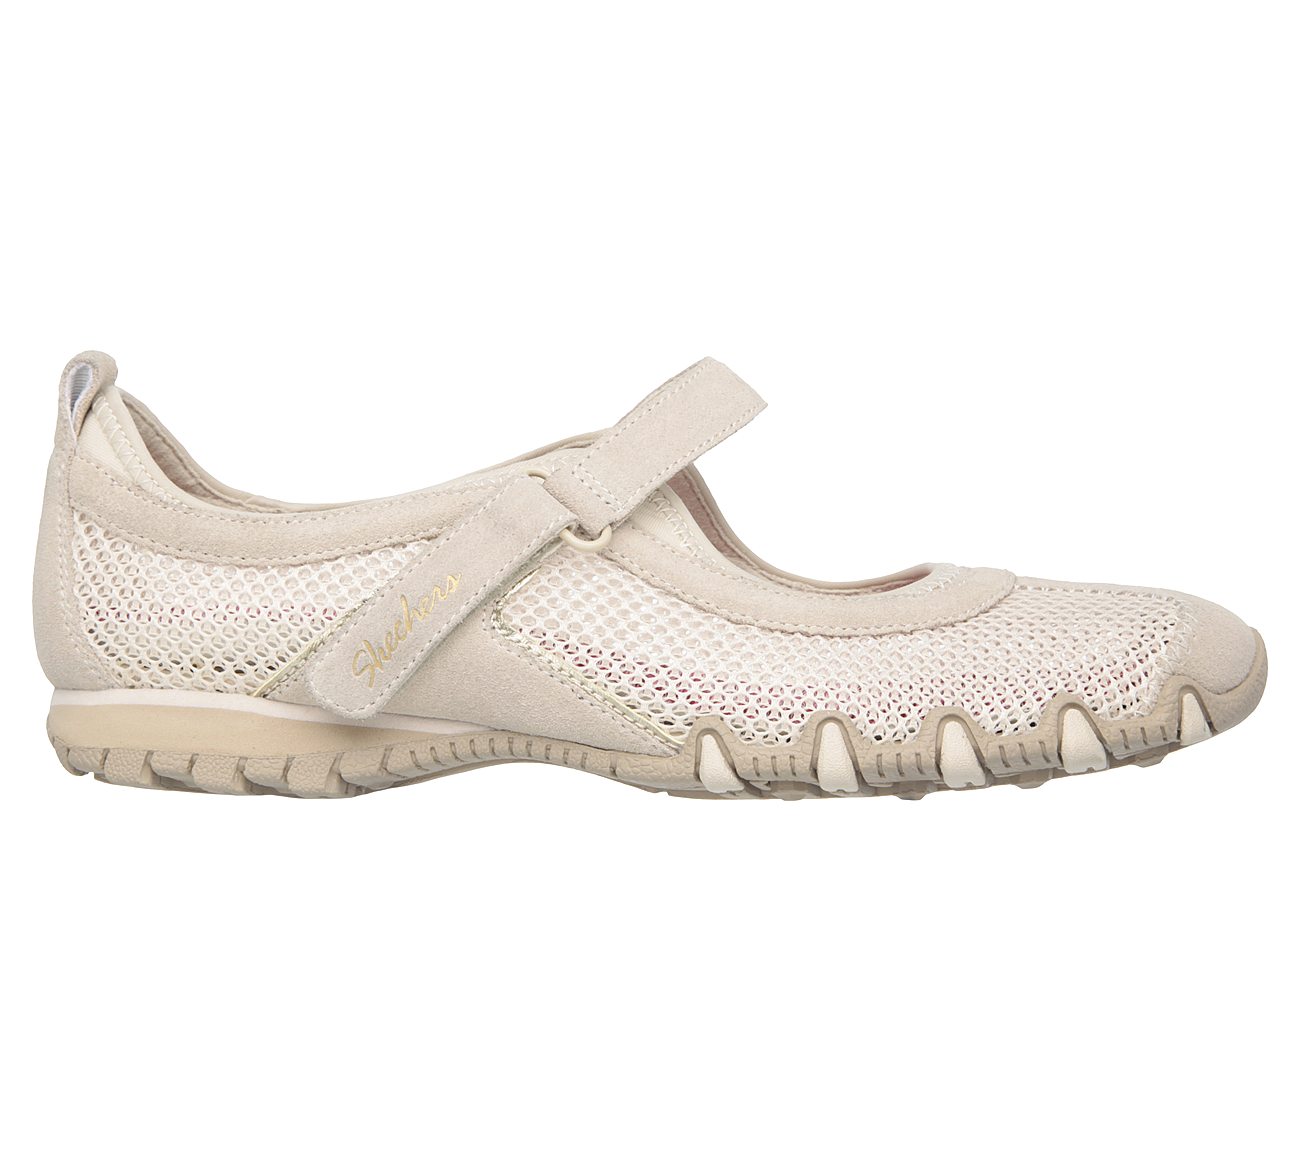 Herb Garden SKECHERS Relaxed Fit Shoes